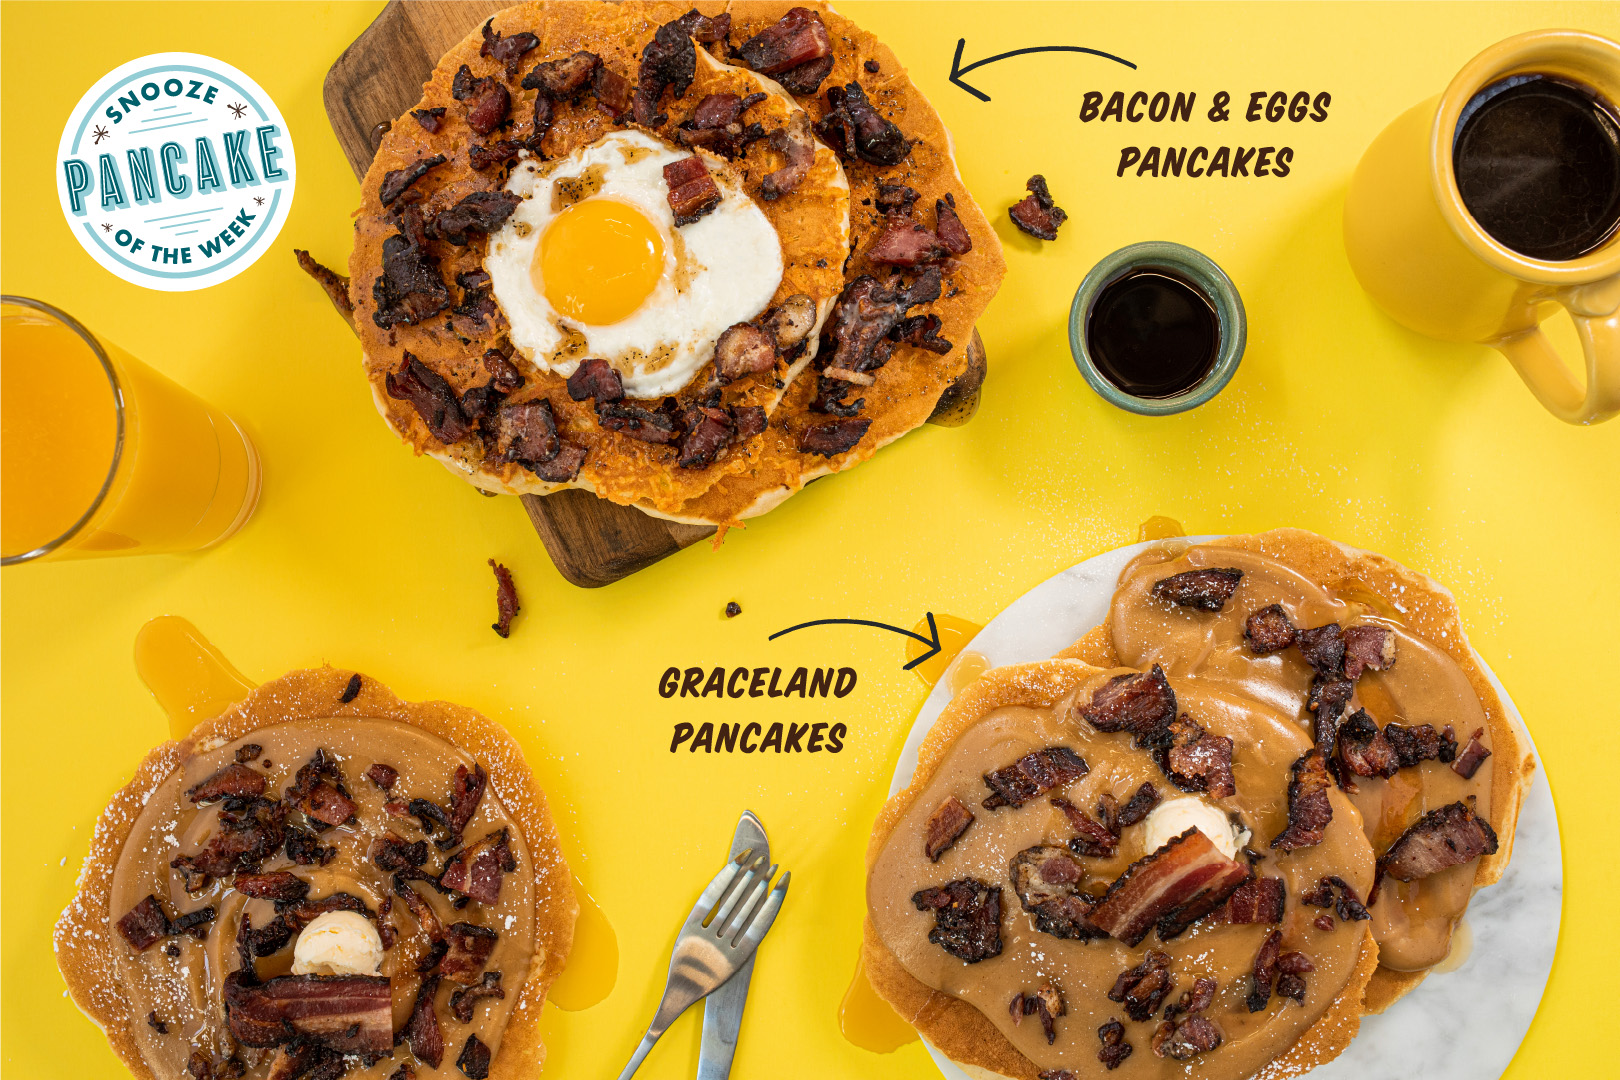 Snooze's Bacon Pancakes of the Week Including Bacon & Eggs + Graceland Pancakes